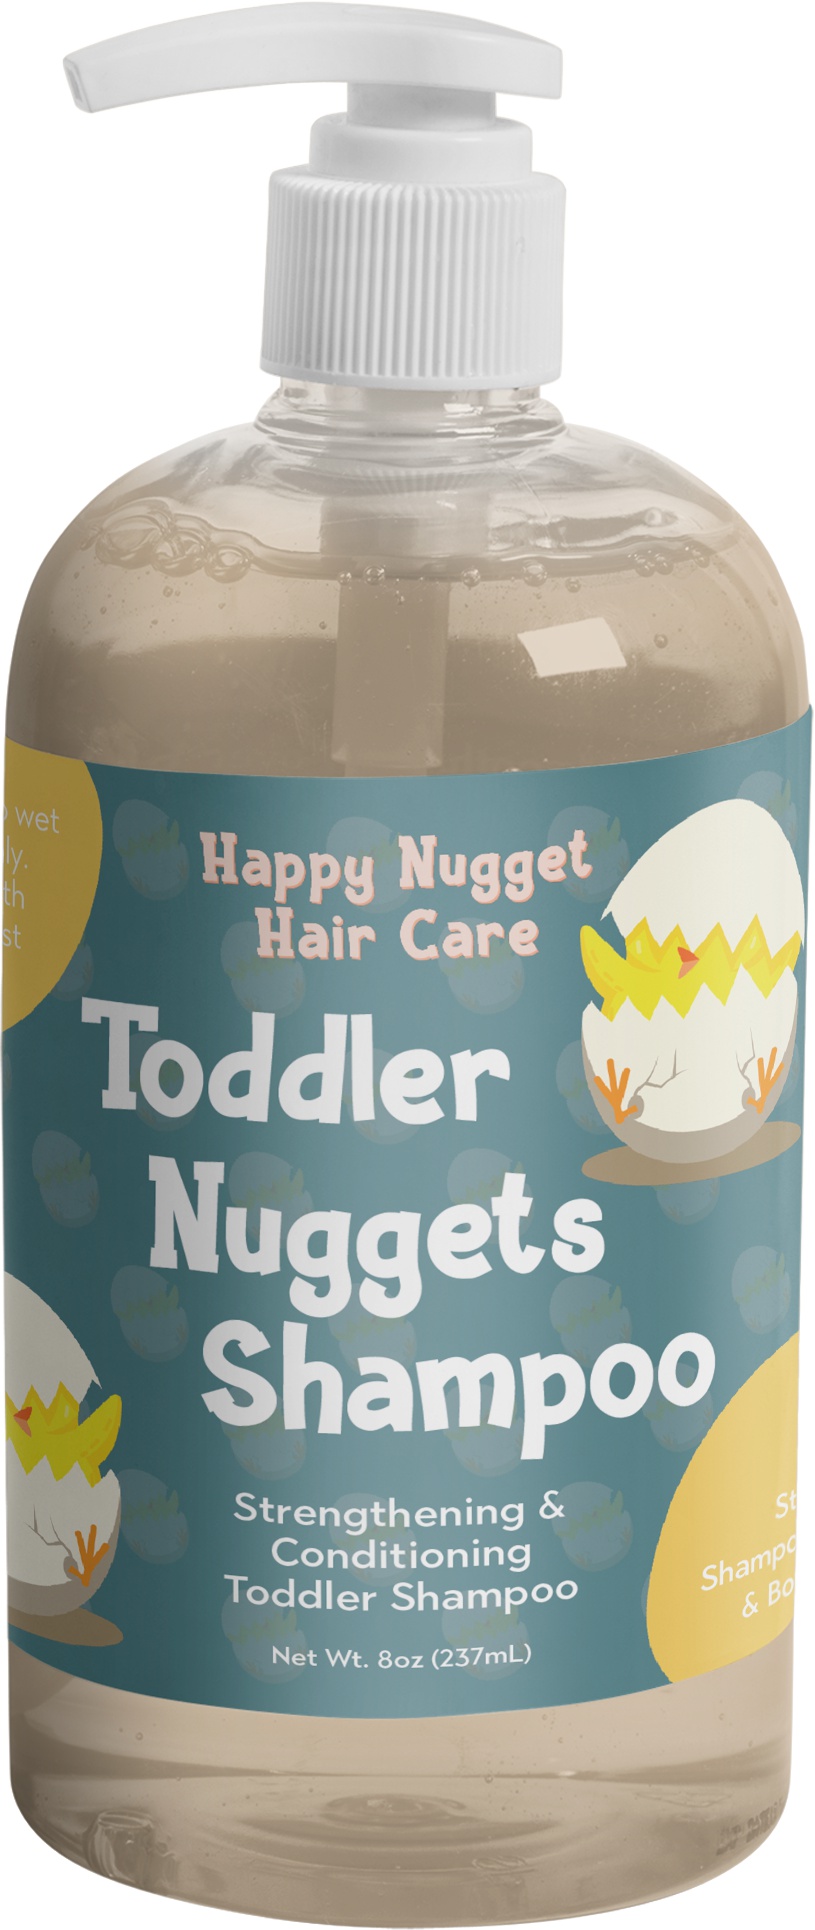 Happy Nugget Hair Care Toddler Nugget Shampoo